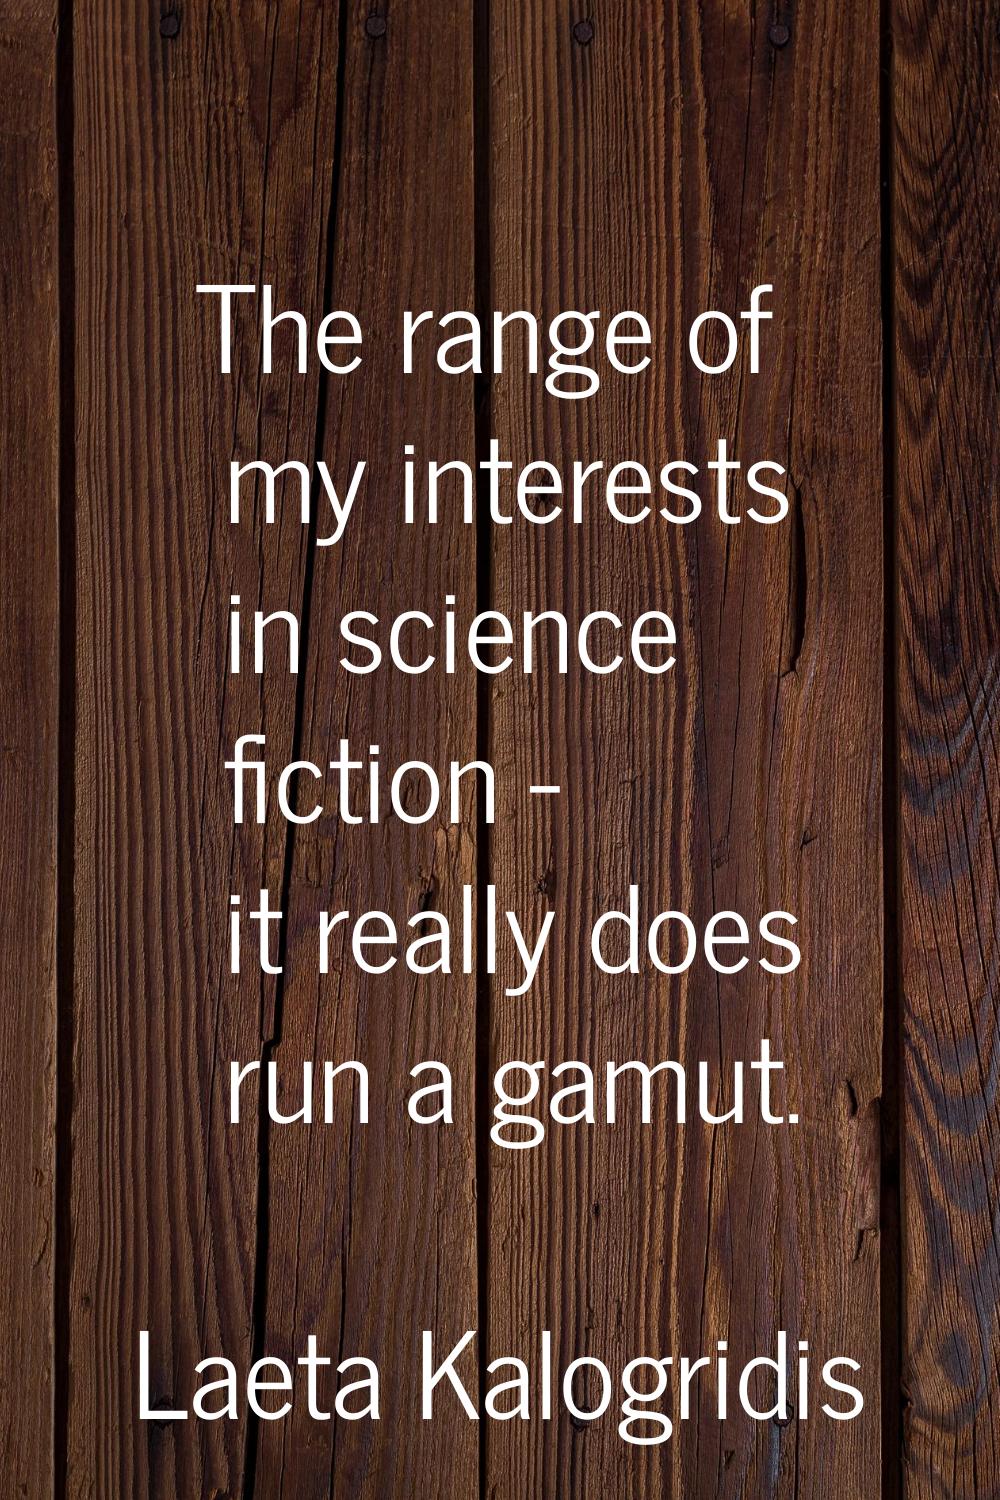 The range of my interests in science fiction - it really does run a gamut.